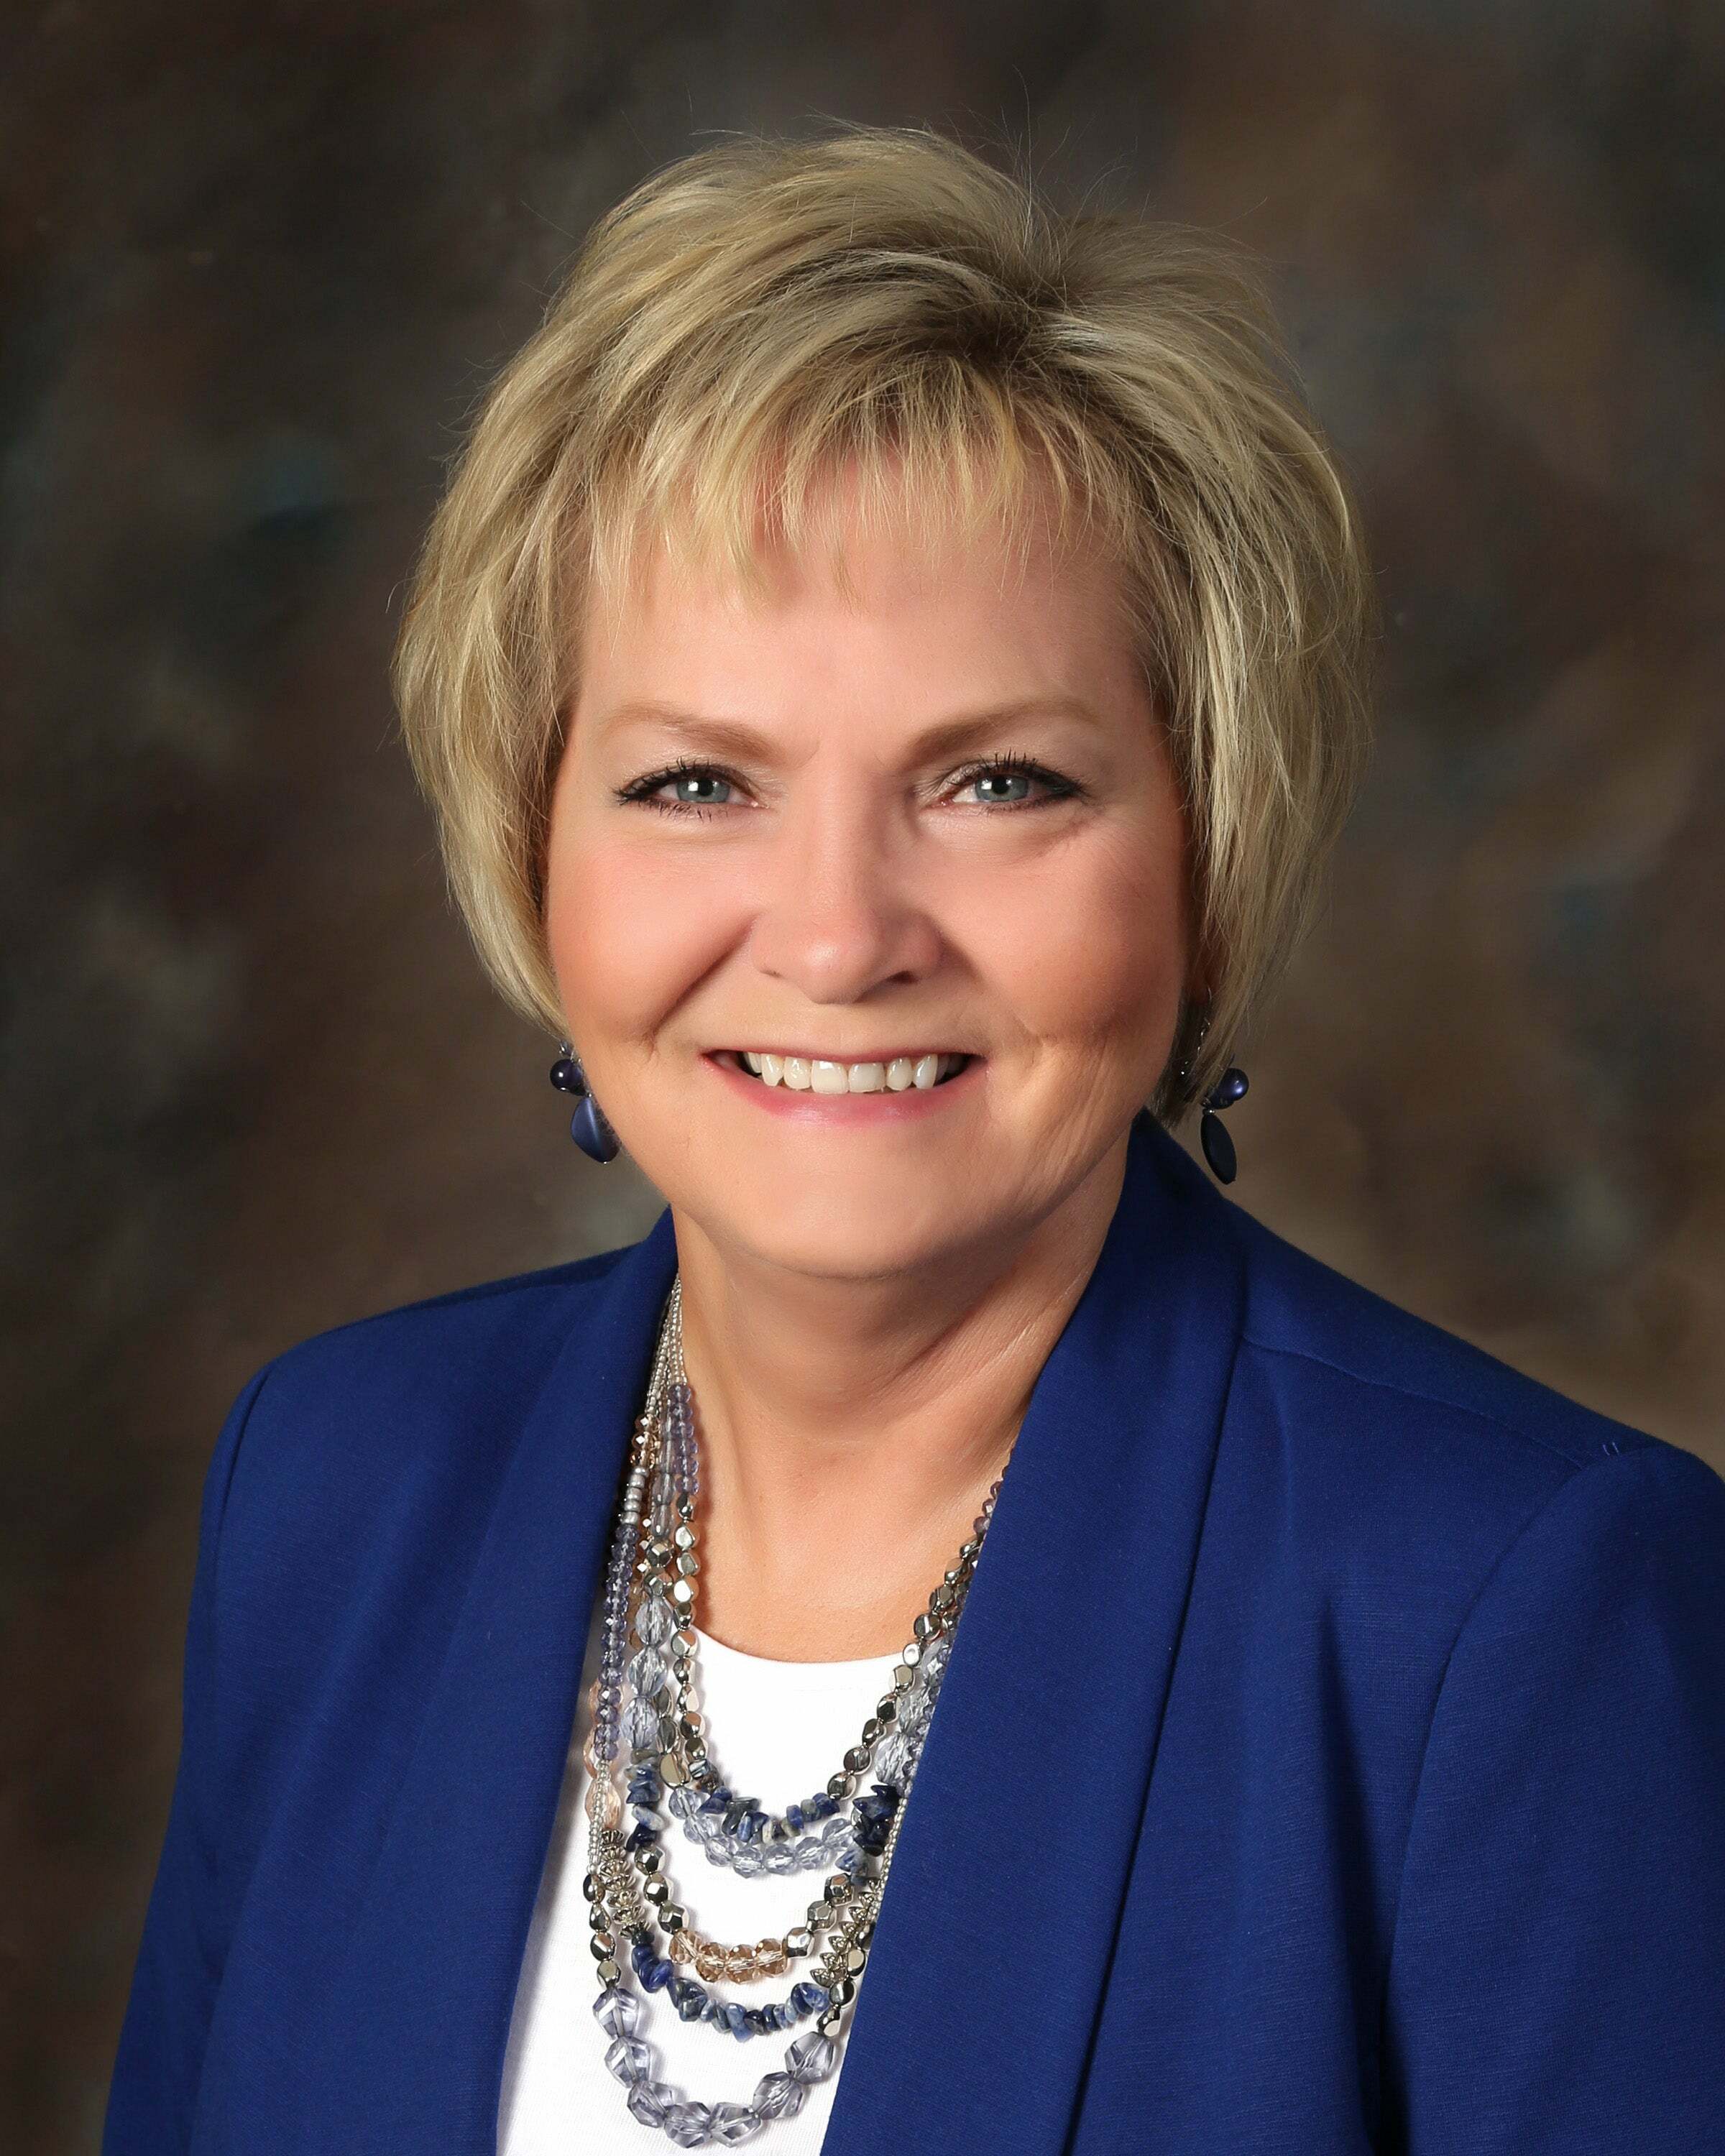 Donna Carlin, Real Estate Salesperson in Sioux City, Associated Brokers Realty, Inc.